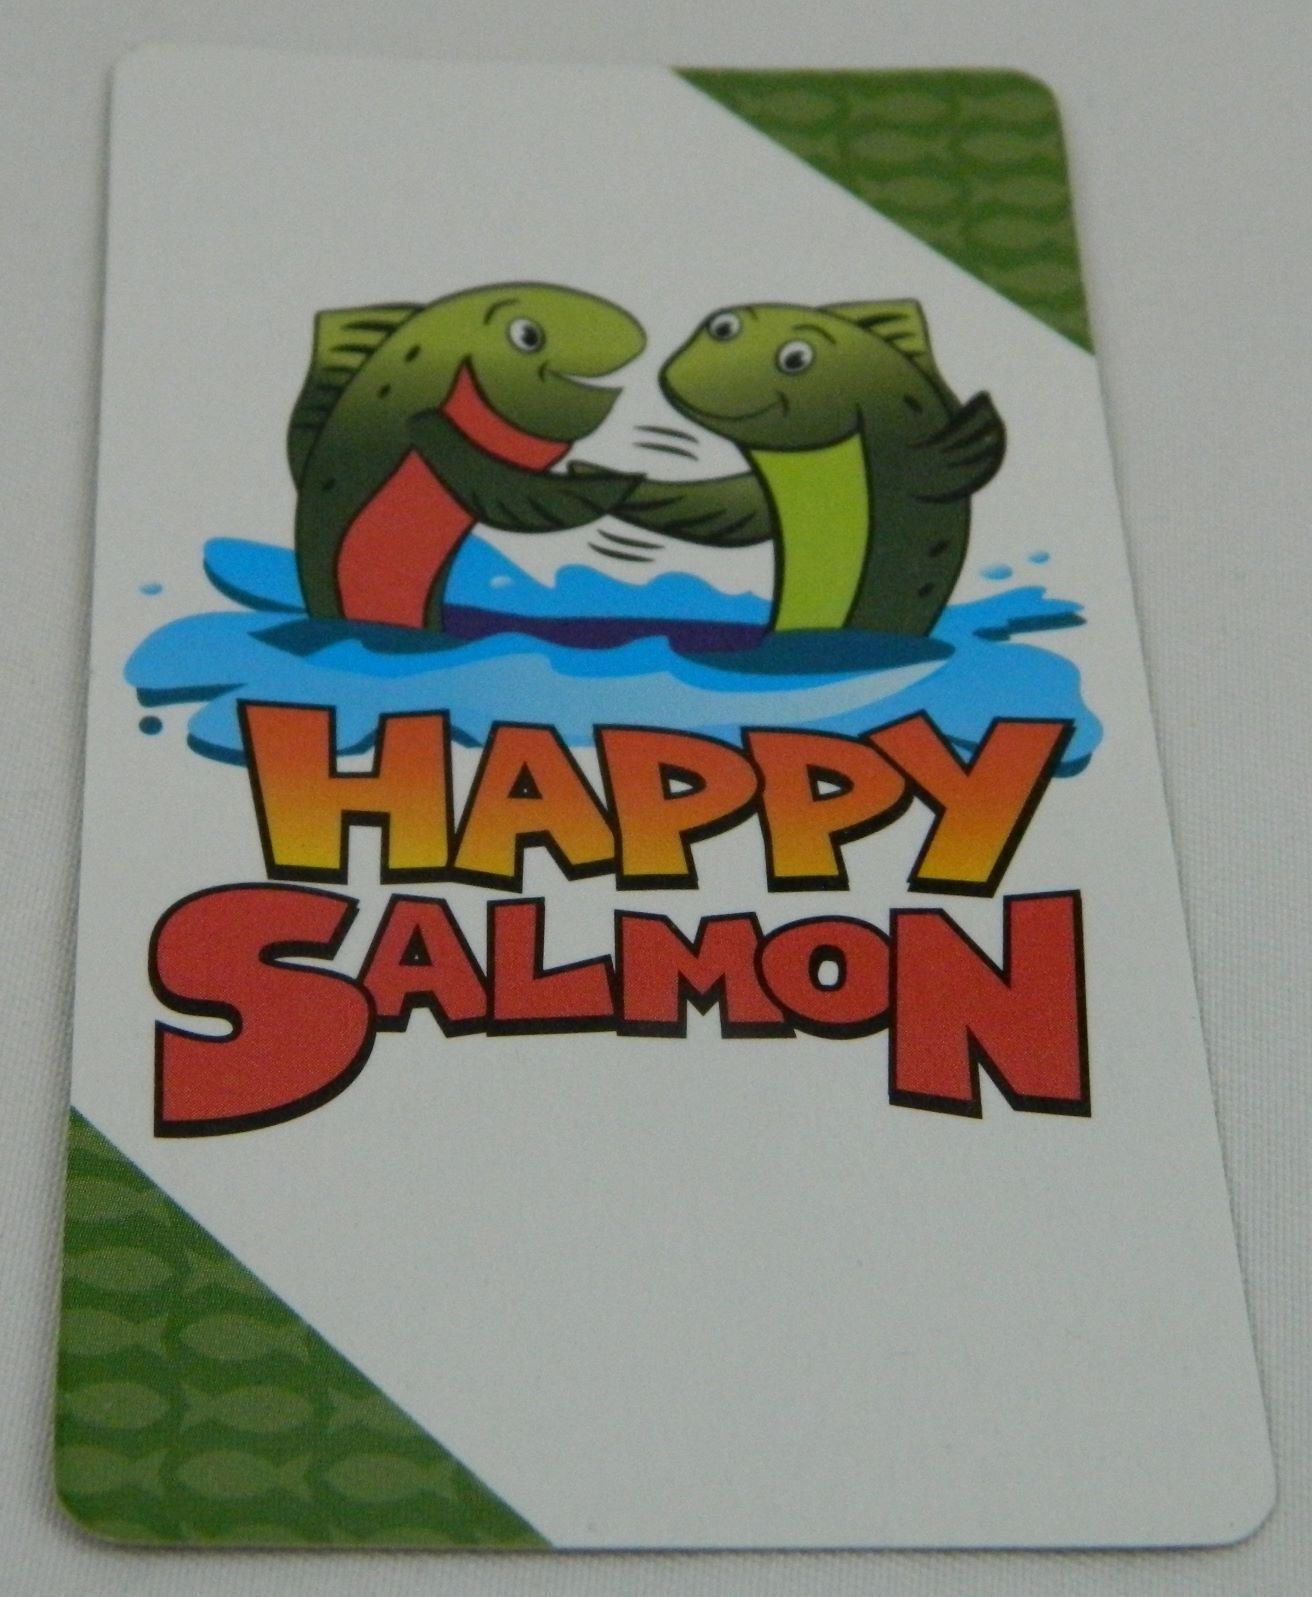 Happy Salmon Review - Board Game Review